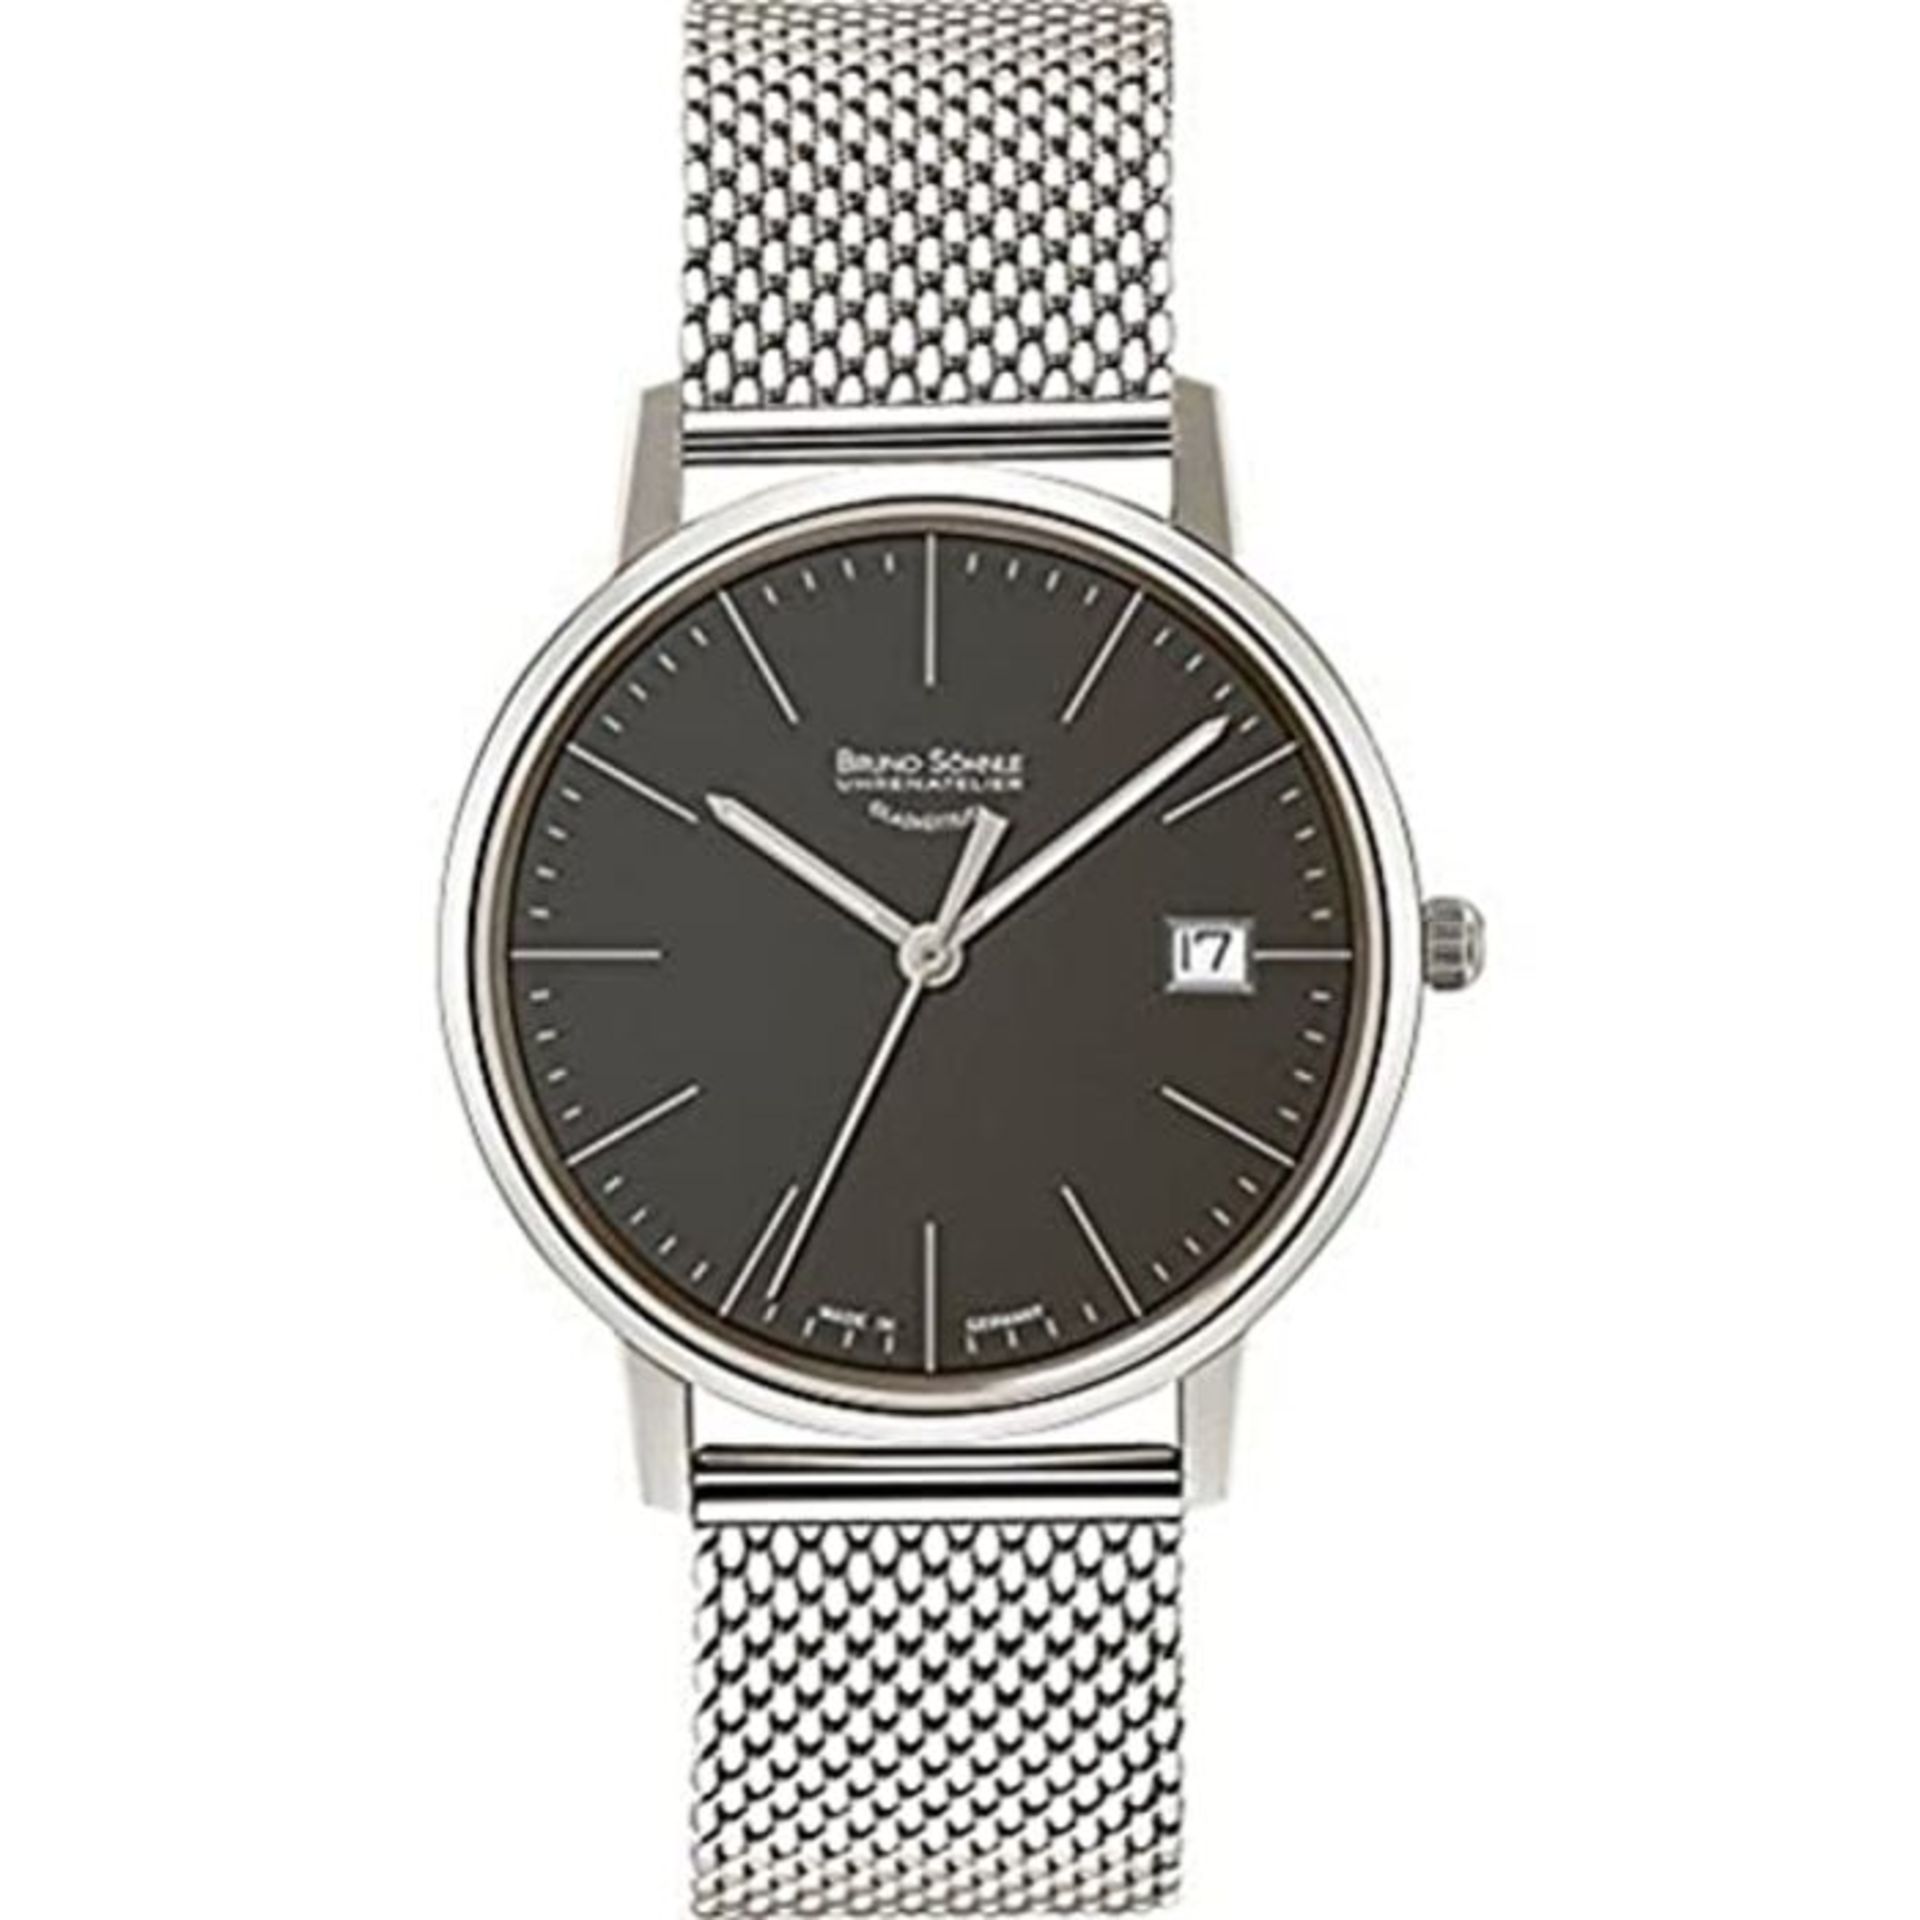 RRP £495.00 Bruno Söhnle Women's Analogue Quartz Watch with Stainless Steel Strap 17-13176-840